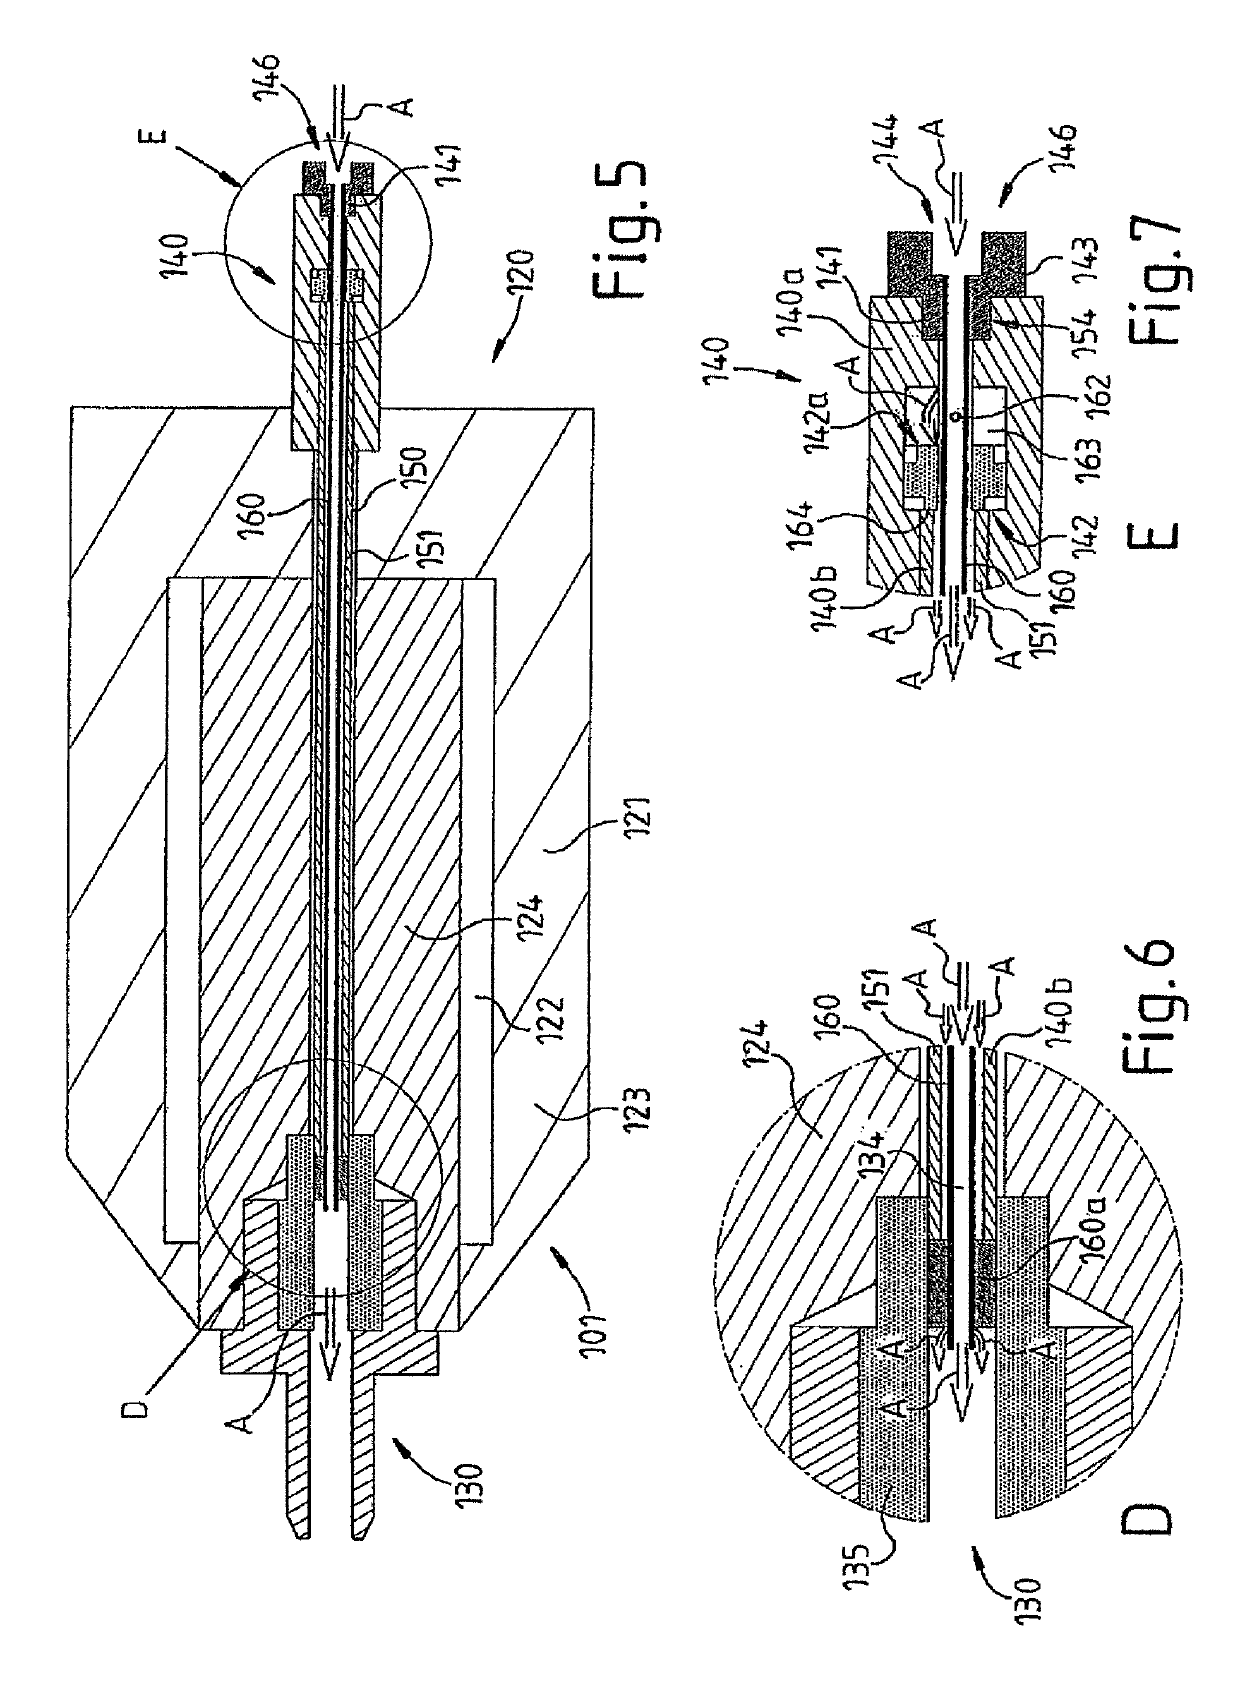 Lubrication system comprising a spindle and an aerosol dispenser